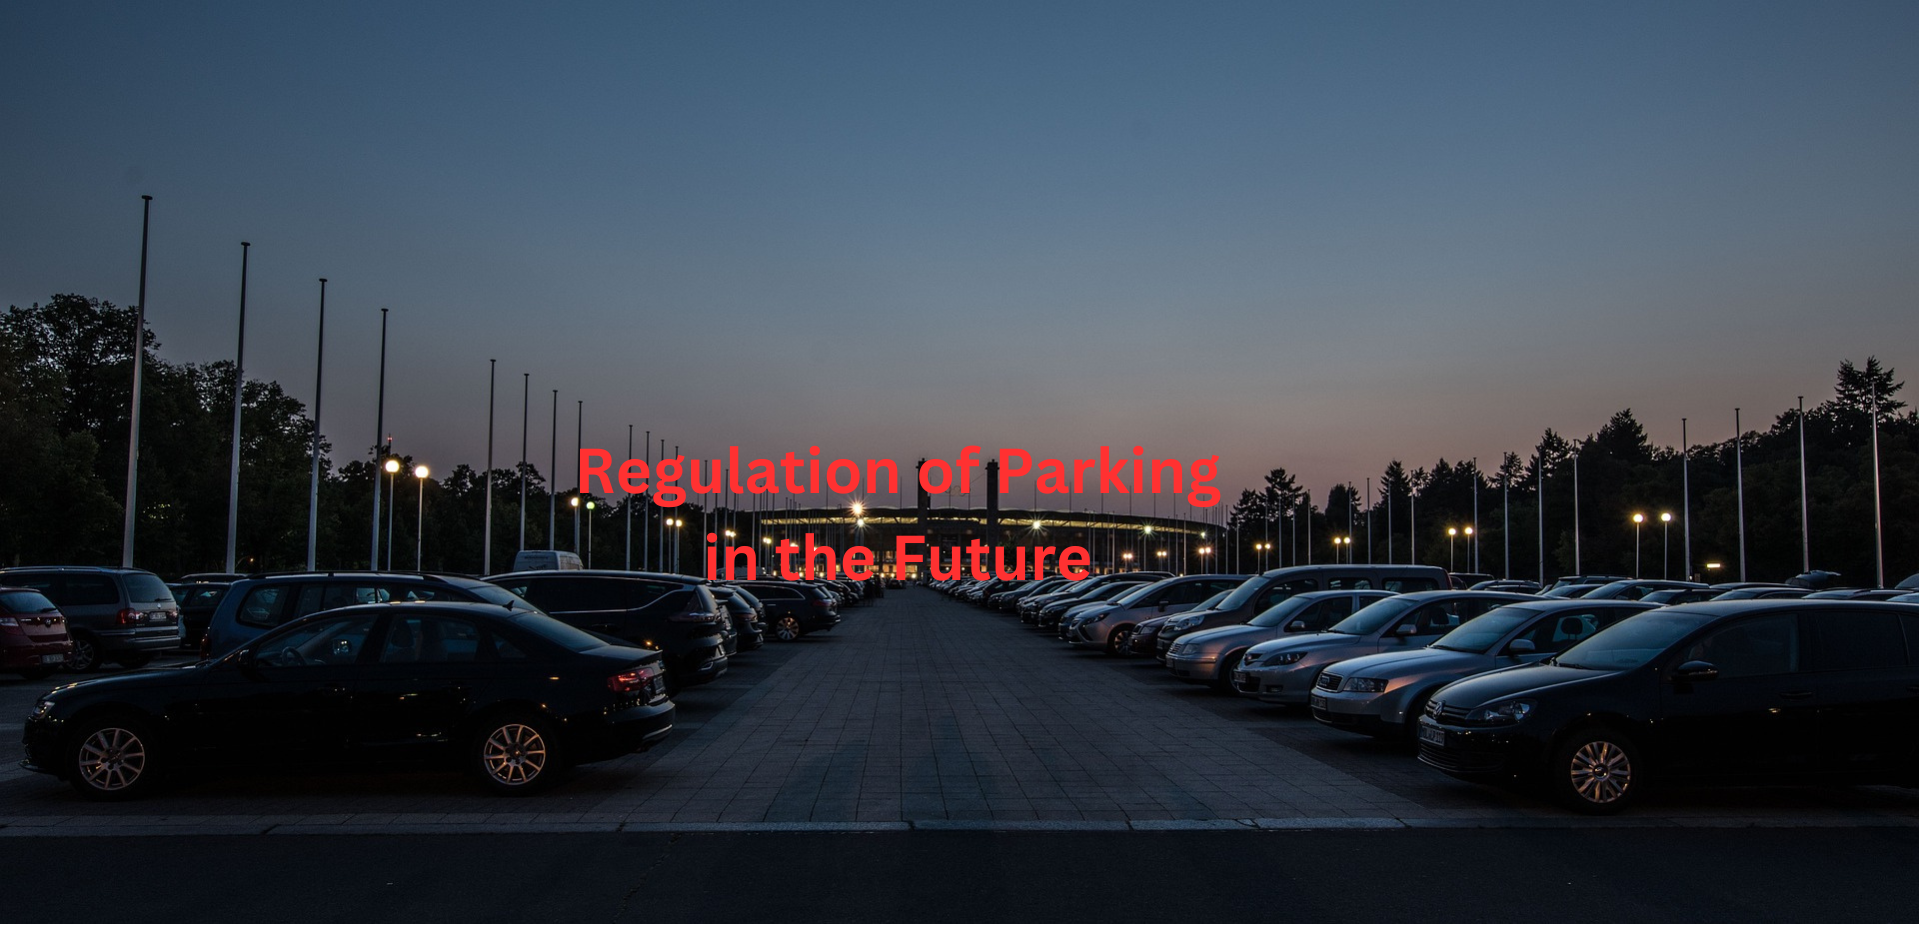 Regulation of Parking in the Future